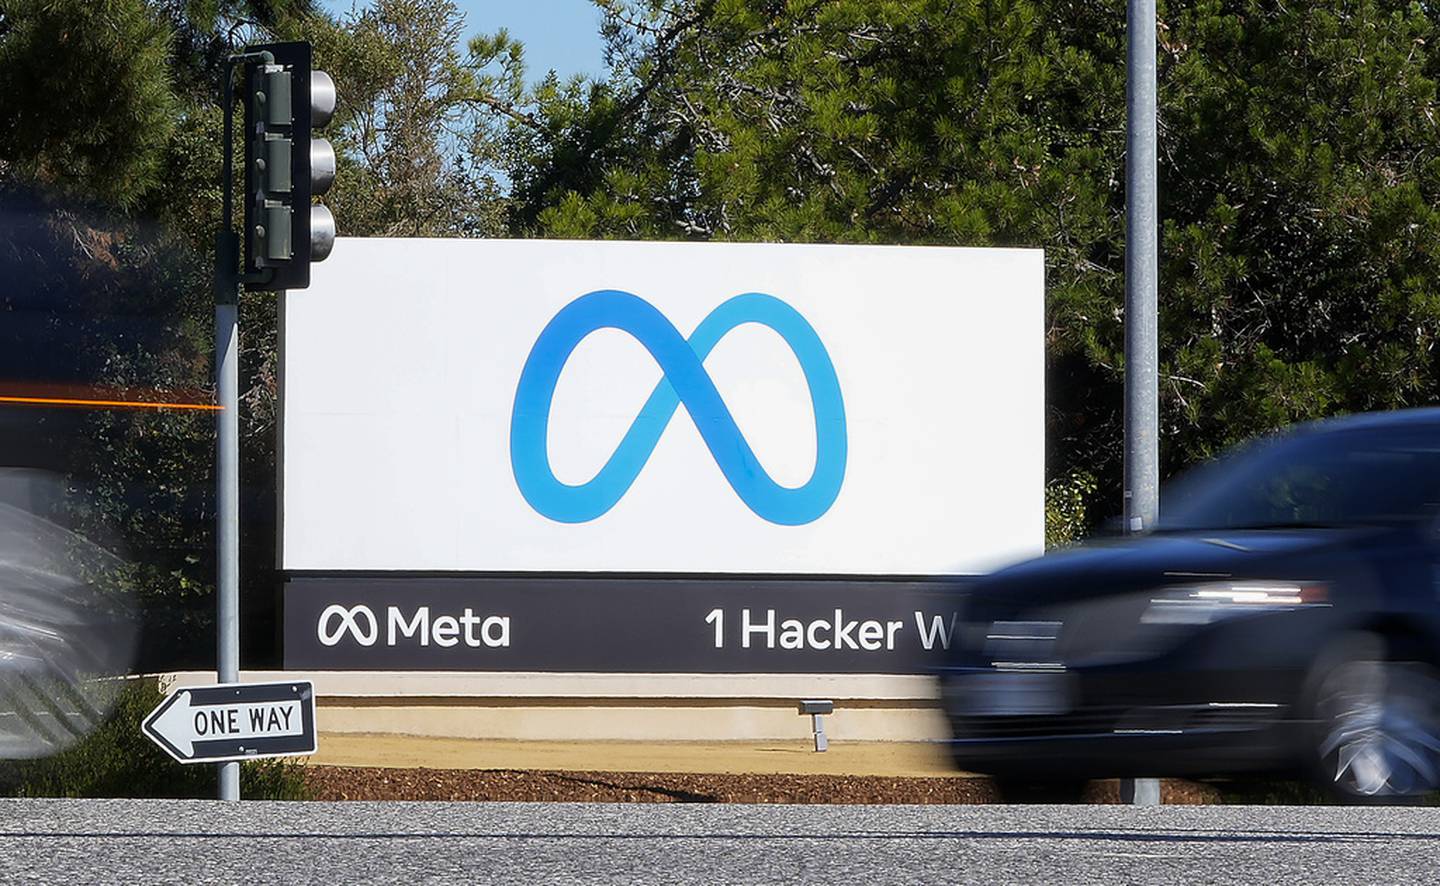 FILE - A car passes Facebook's new Meta logo on a sign at the company headquarters on Oct. 28, 2021, in Menlo Park, Calif. For the first time in a year, the big companies in the S&P 500 may be seeing their profits grow again. The company has been focusing on keeping costs lower, and Wall Street also expects its revenue growth accelerated during the latest quarter.